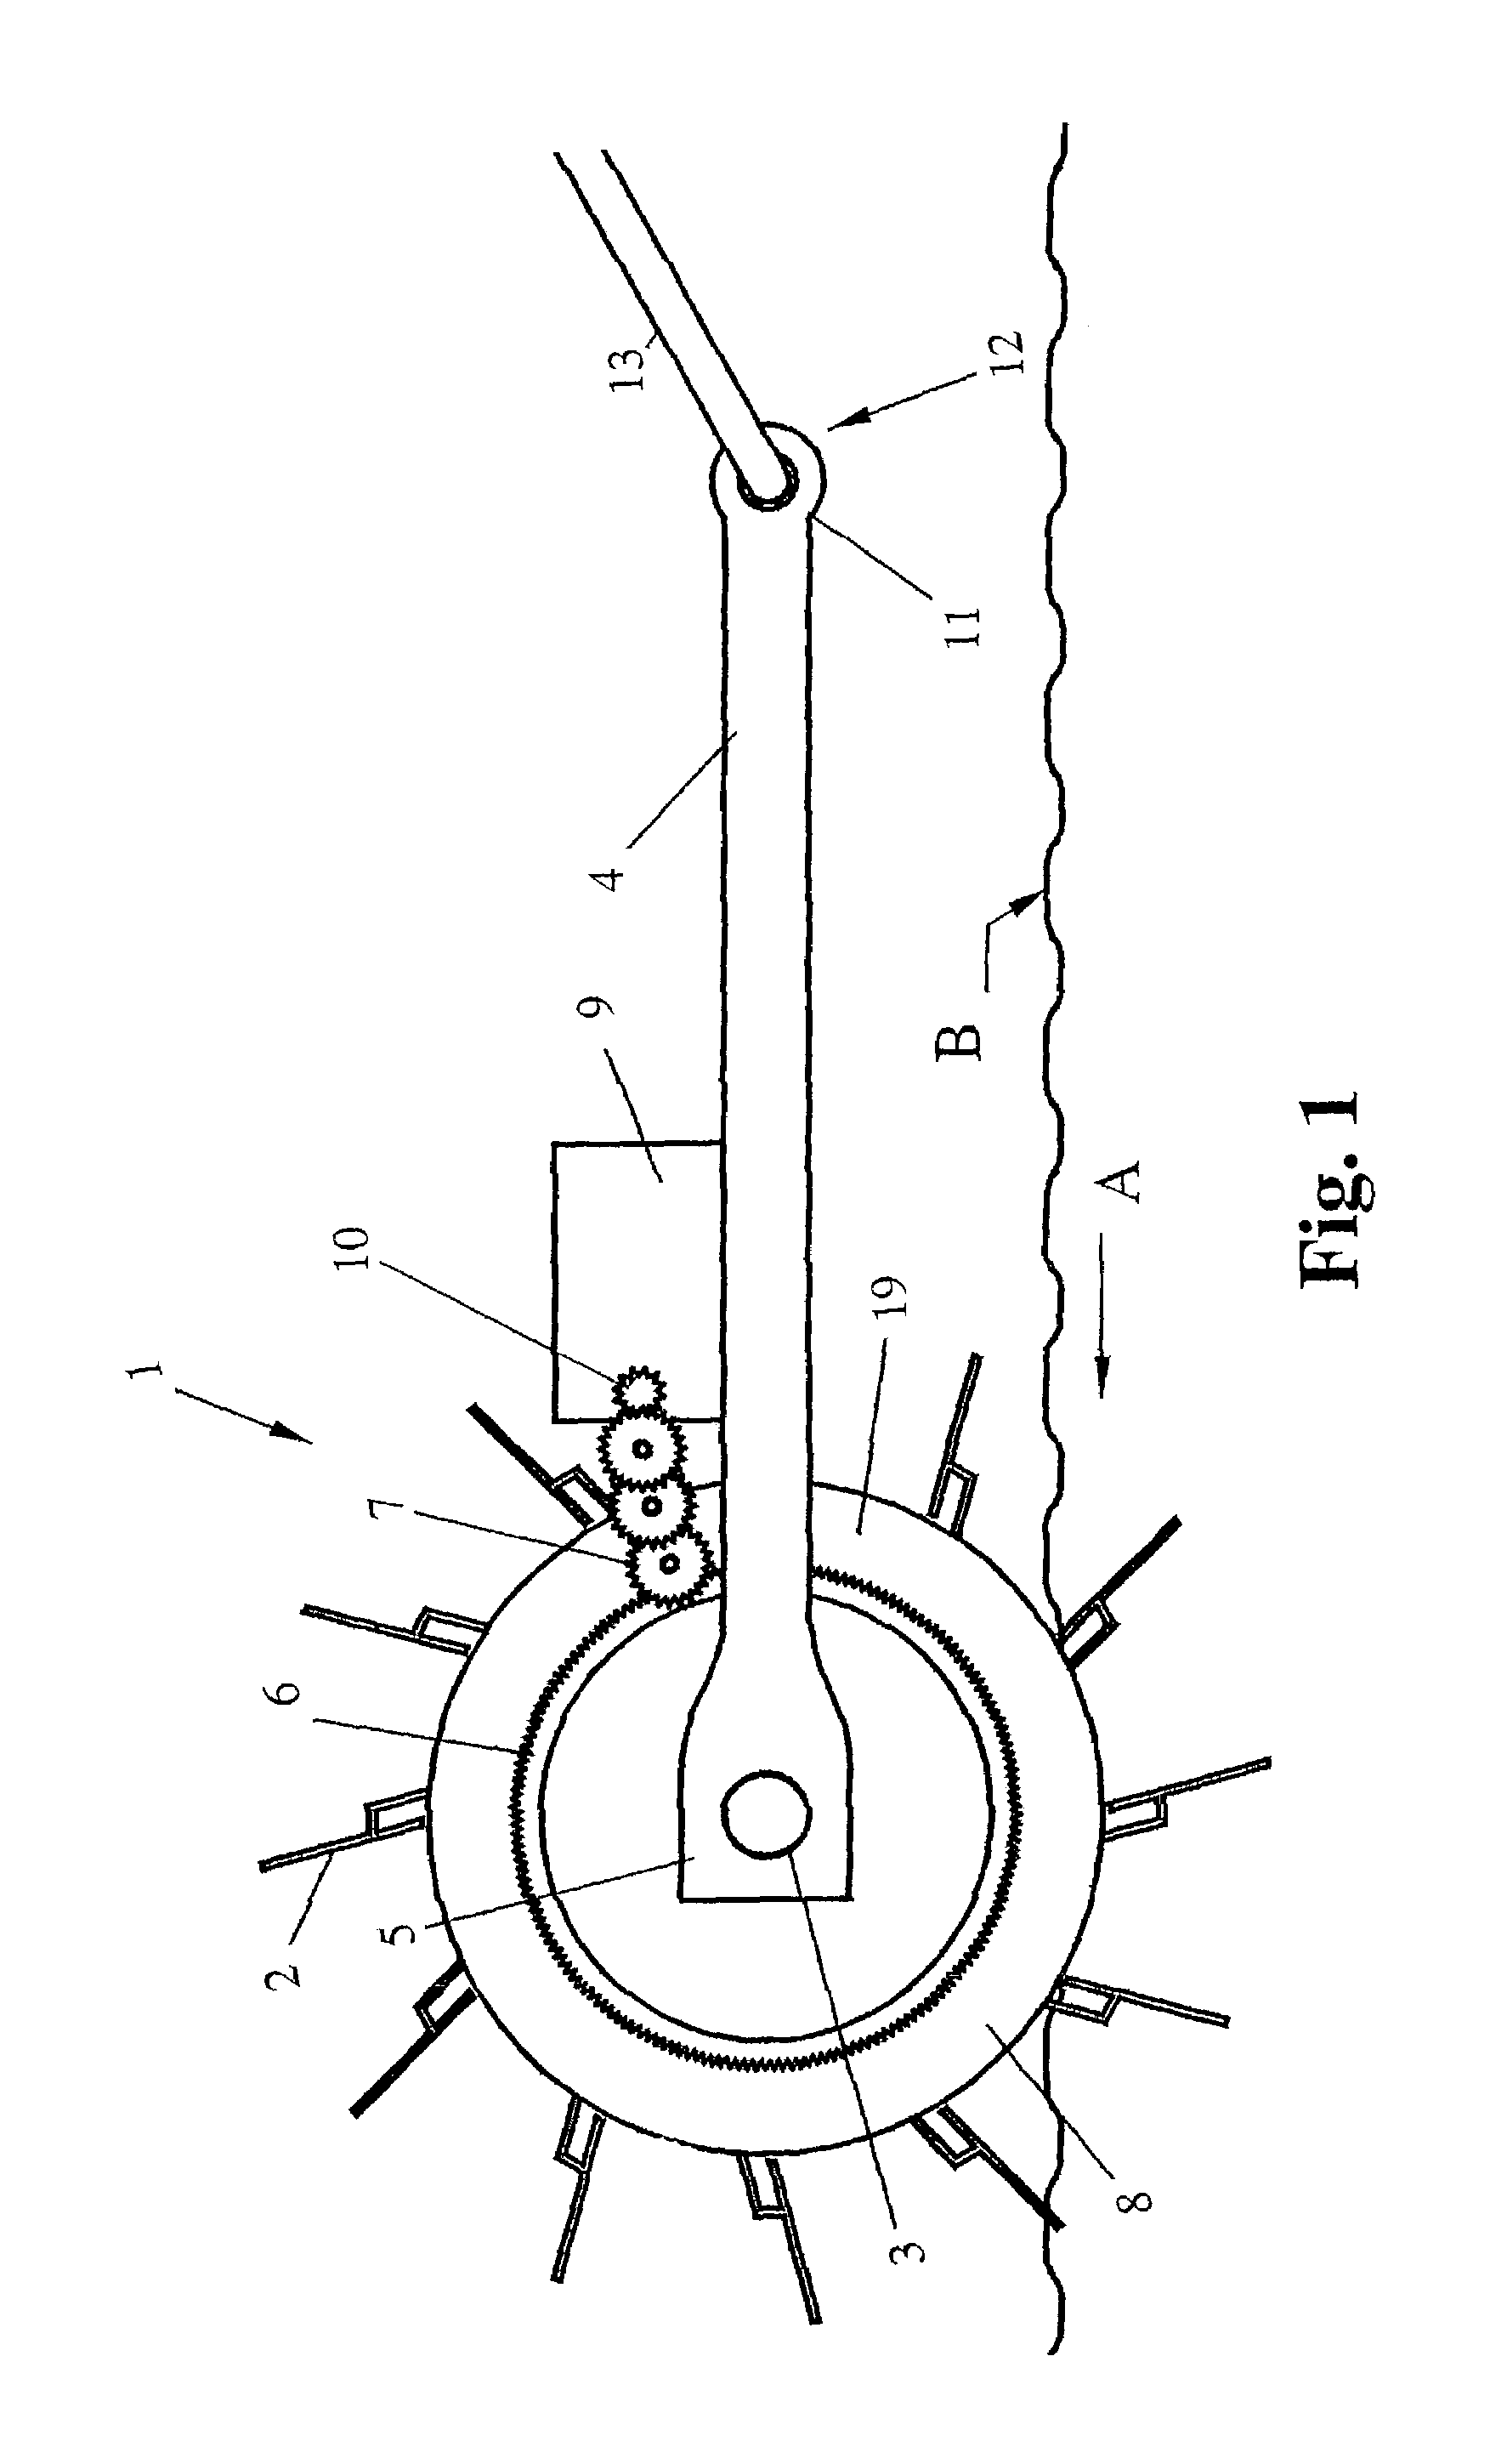 Portable power generating devices